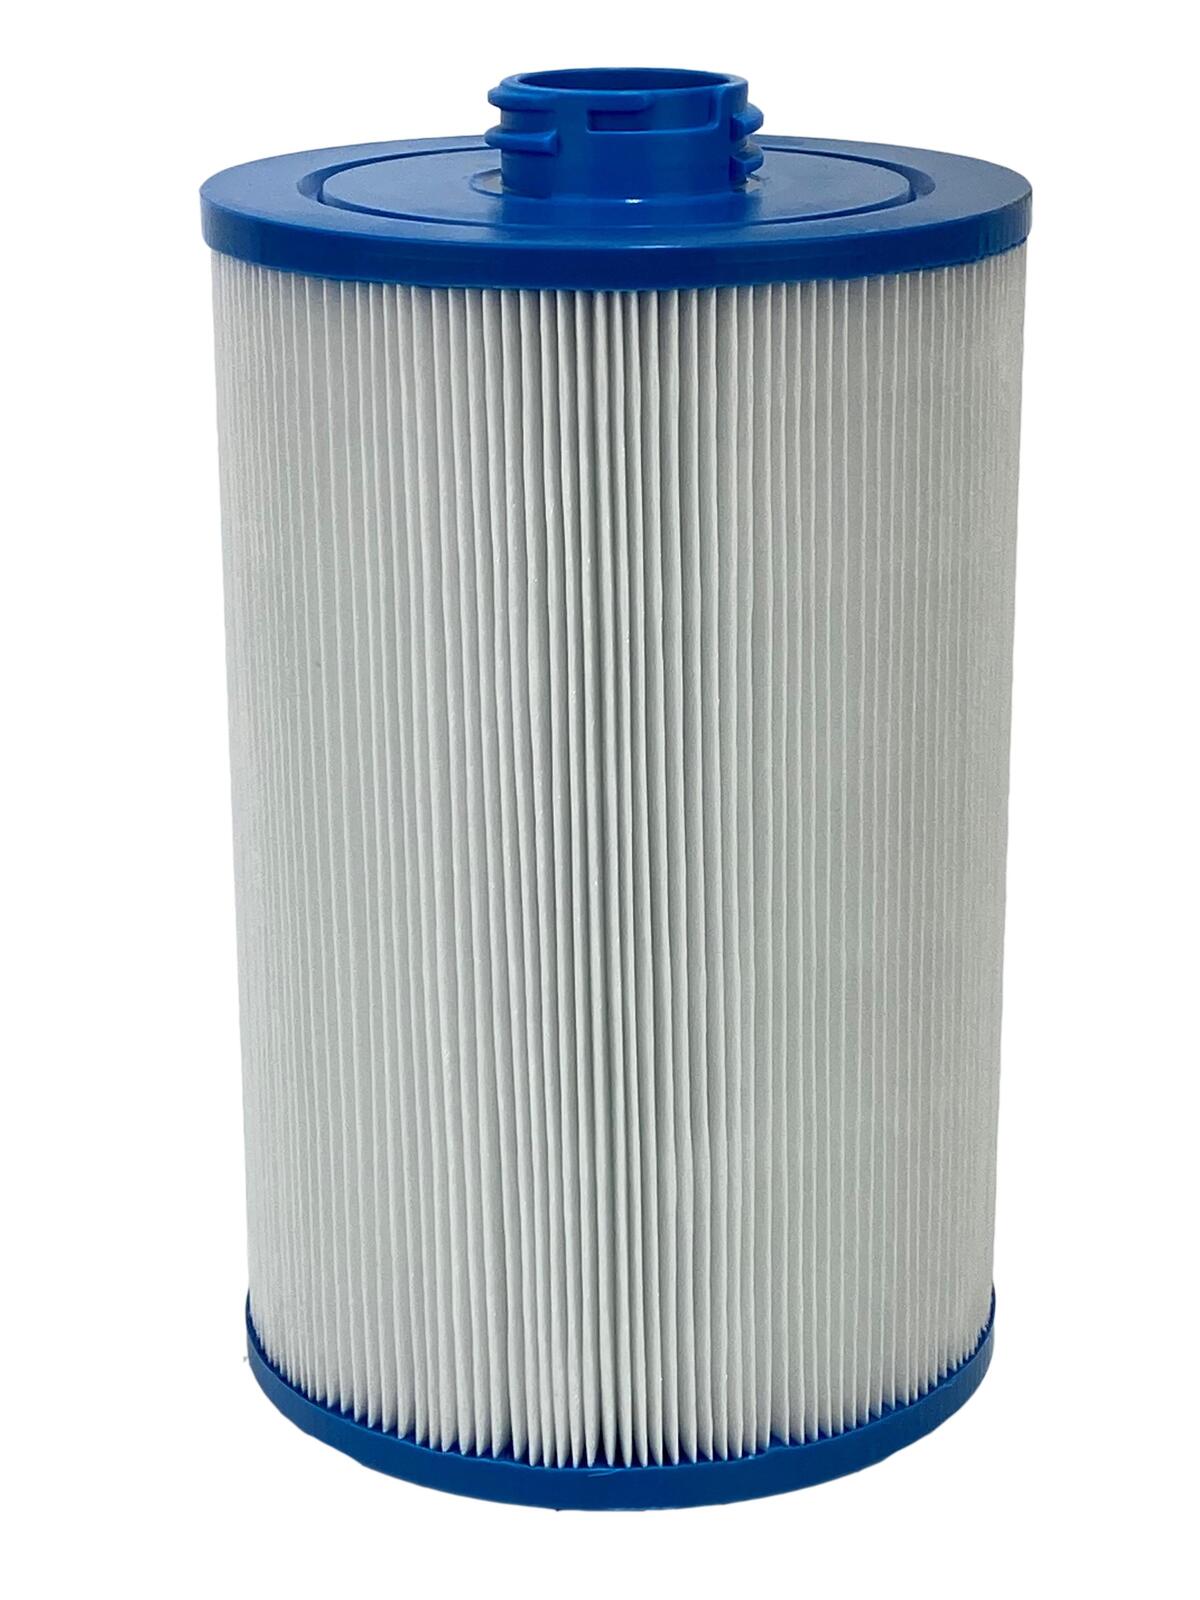 Oasis Spas Cam / Twist Lock Filter - Refresh your spa with our high-performance filter